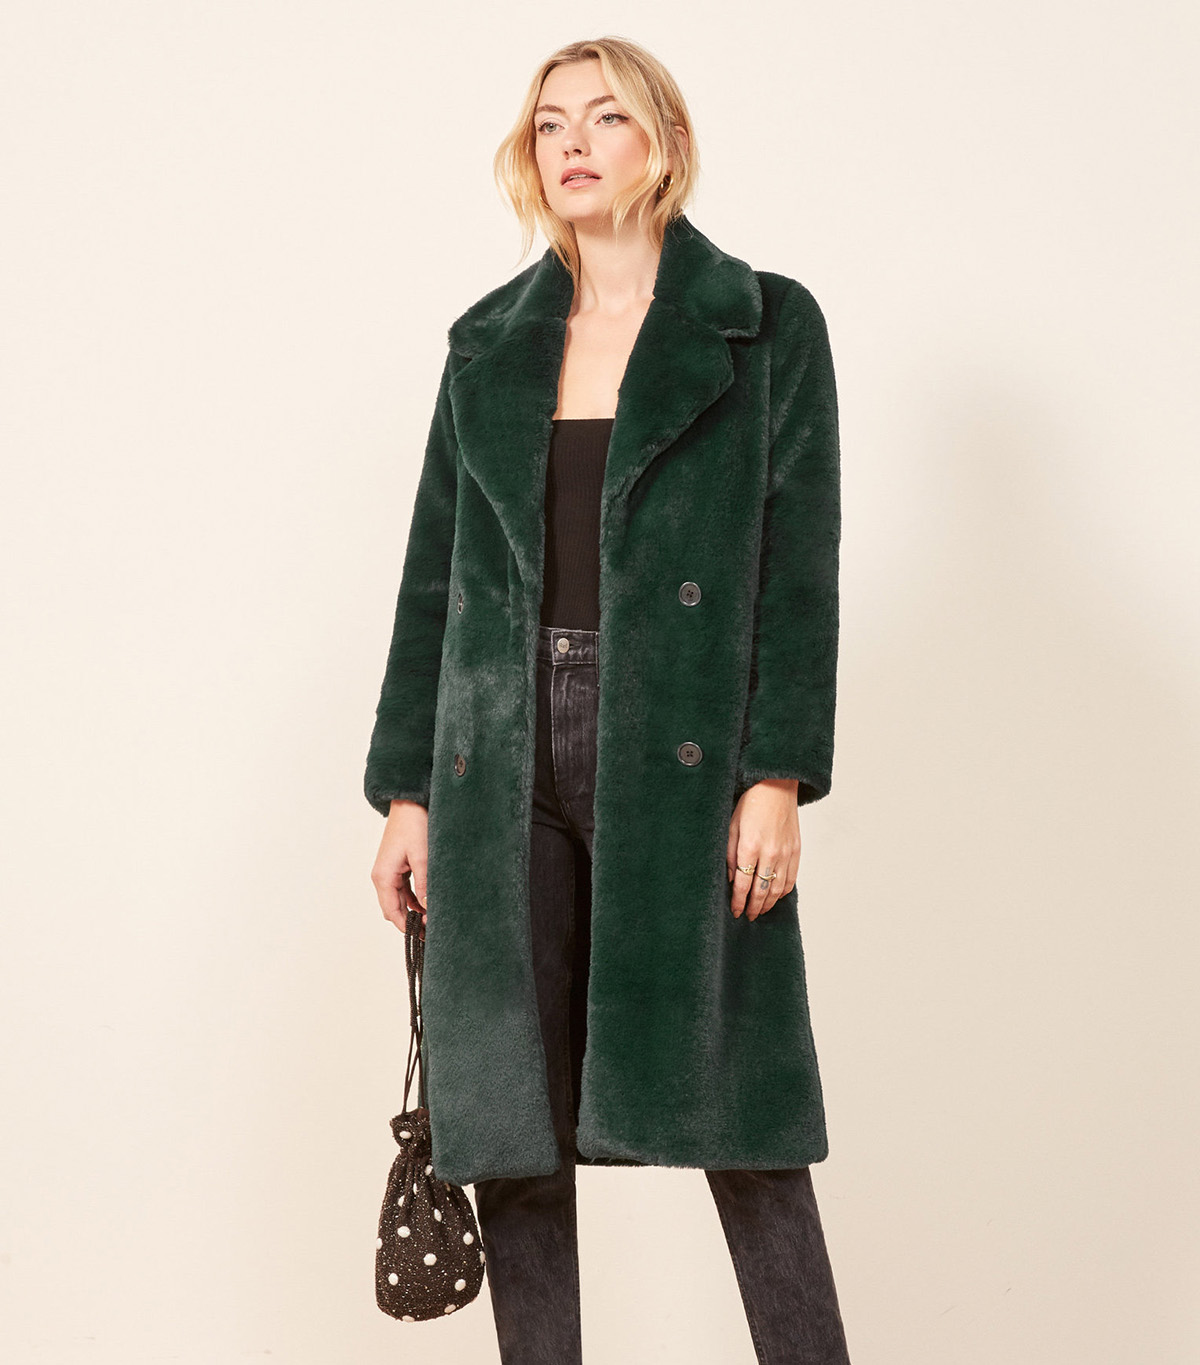 19 Stylish Faux-Fur Coats for Fall and Winter | Who What Wear UK